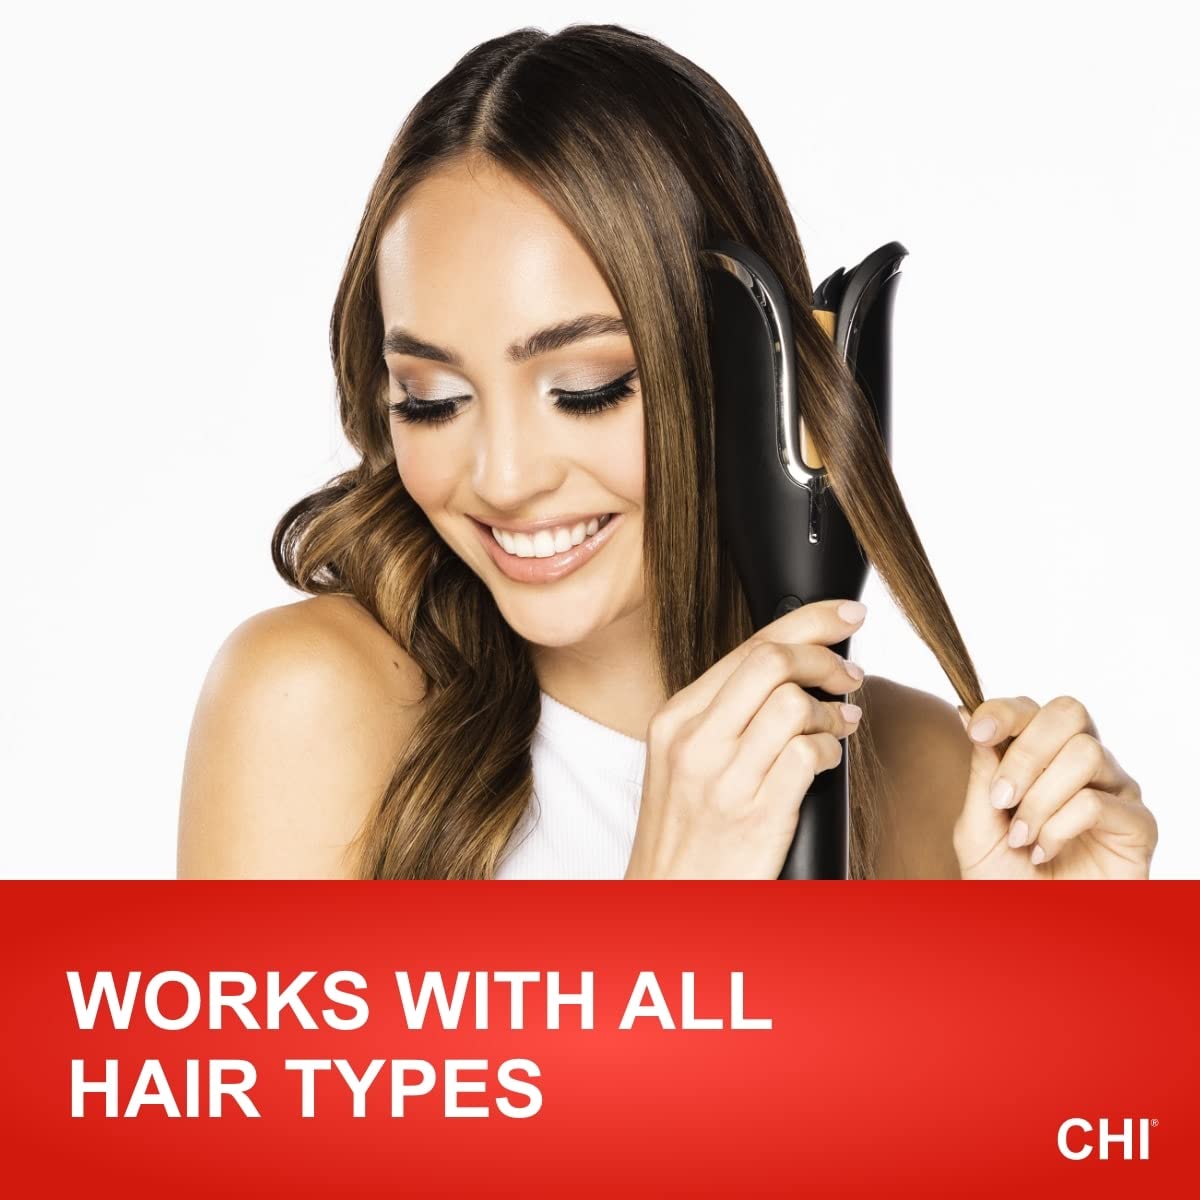 CHI Spin N Curl in Onyx Black. Ideal for Shoulder-Length Hair between 6-16” inches.